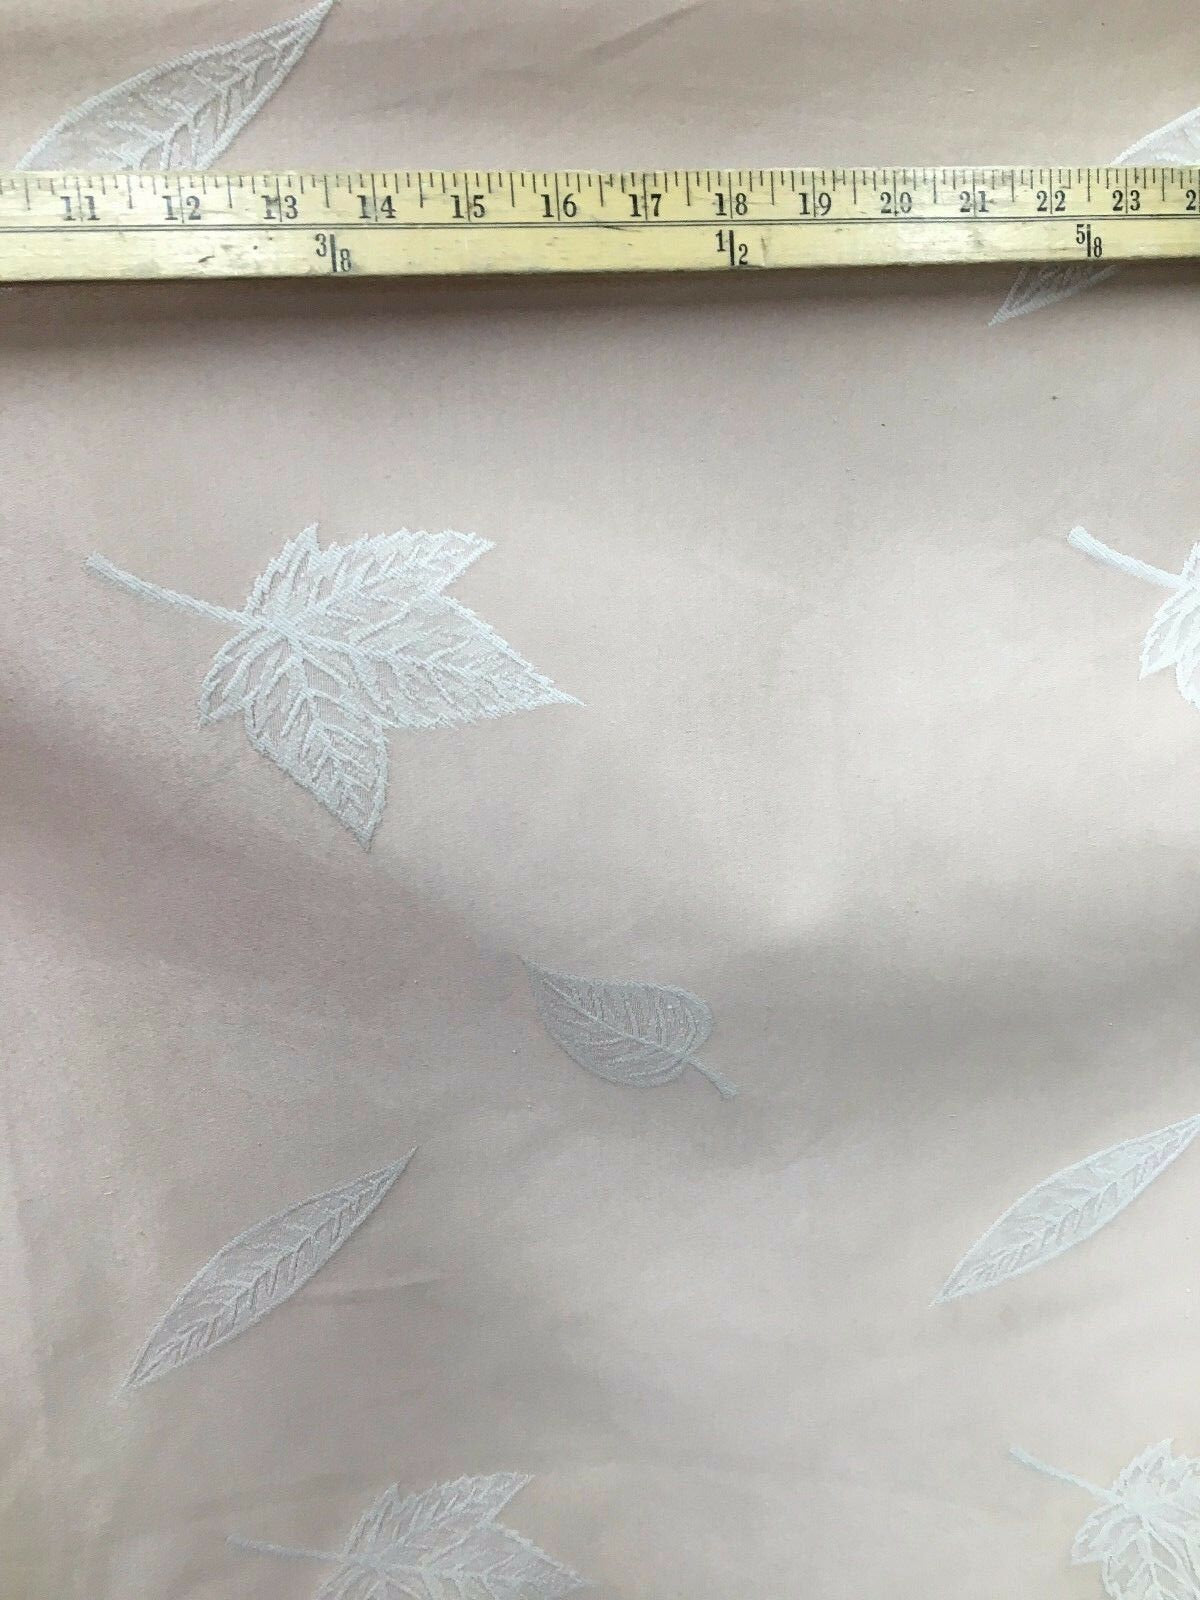 PEACH WHITE Leaves Brocade Upholstery Drapery Fabric (54 in.) Sold By The Yard